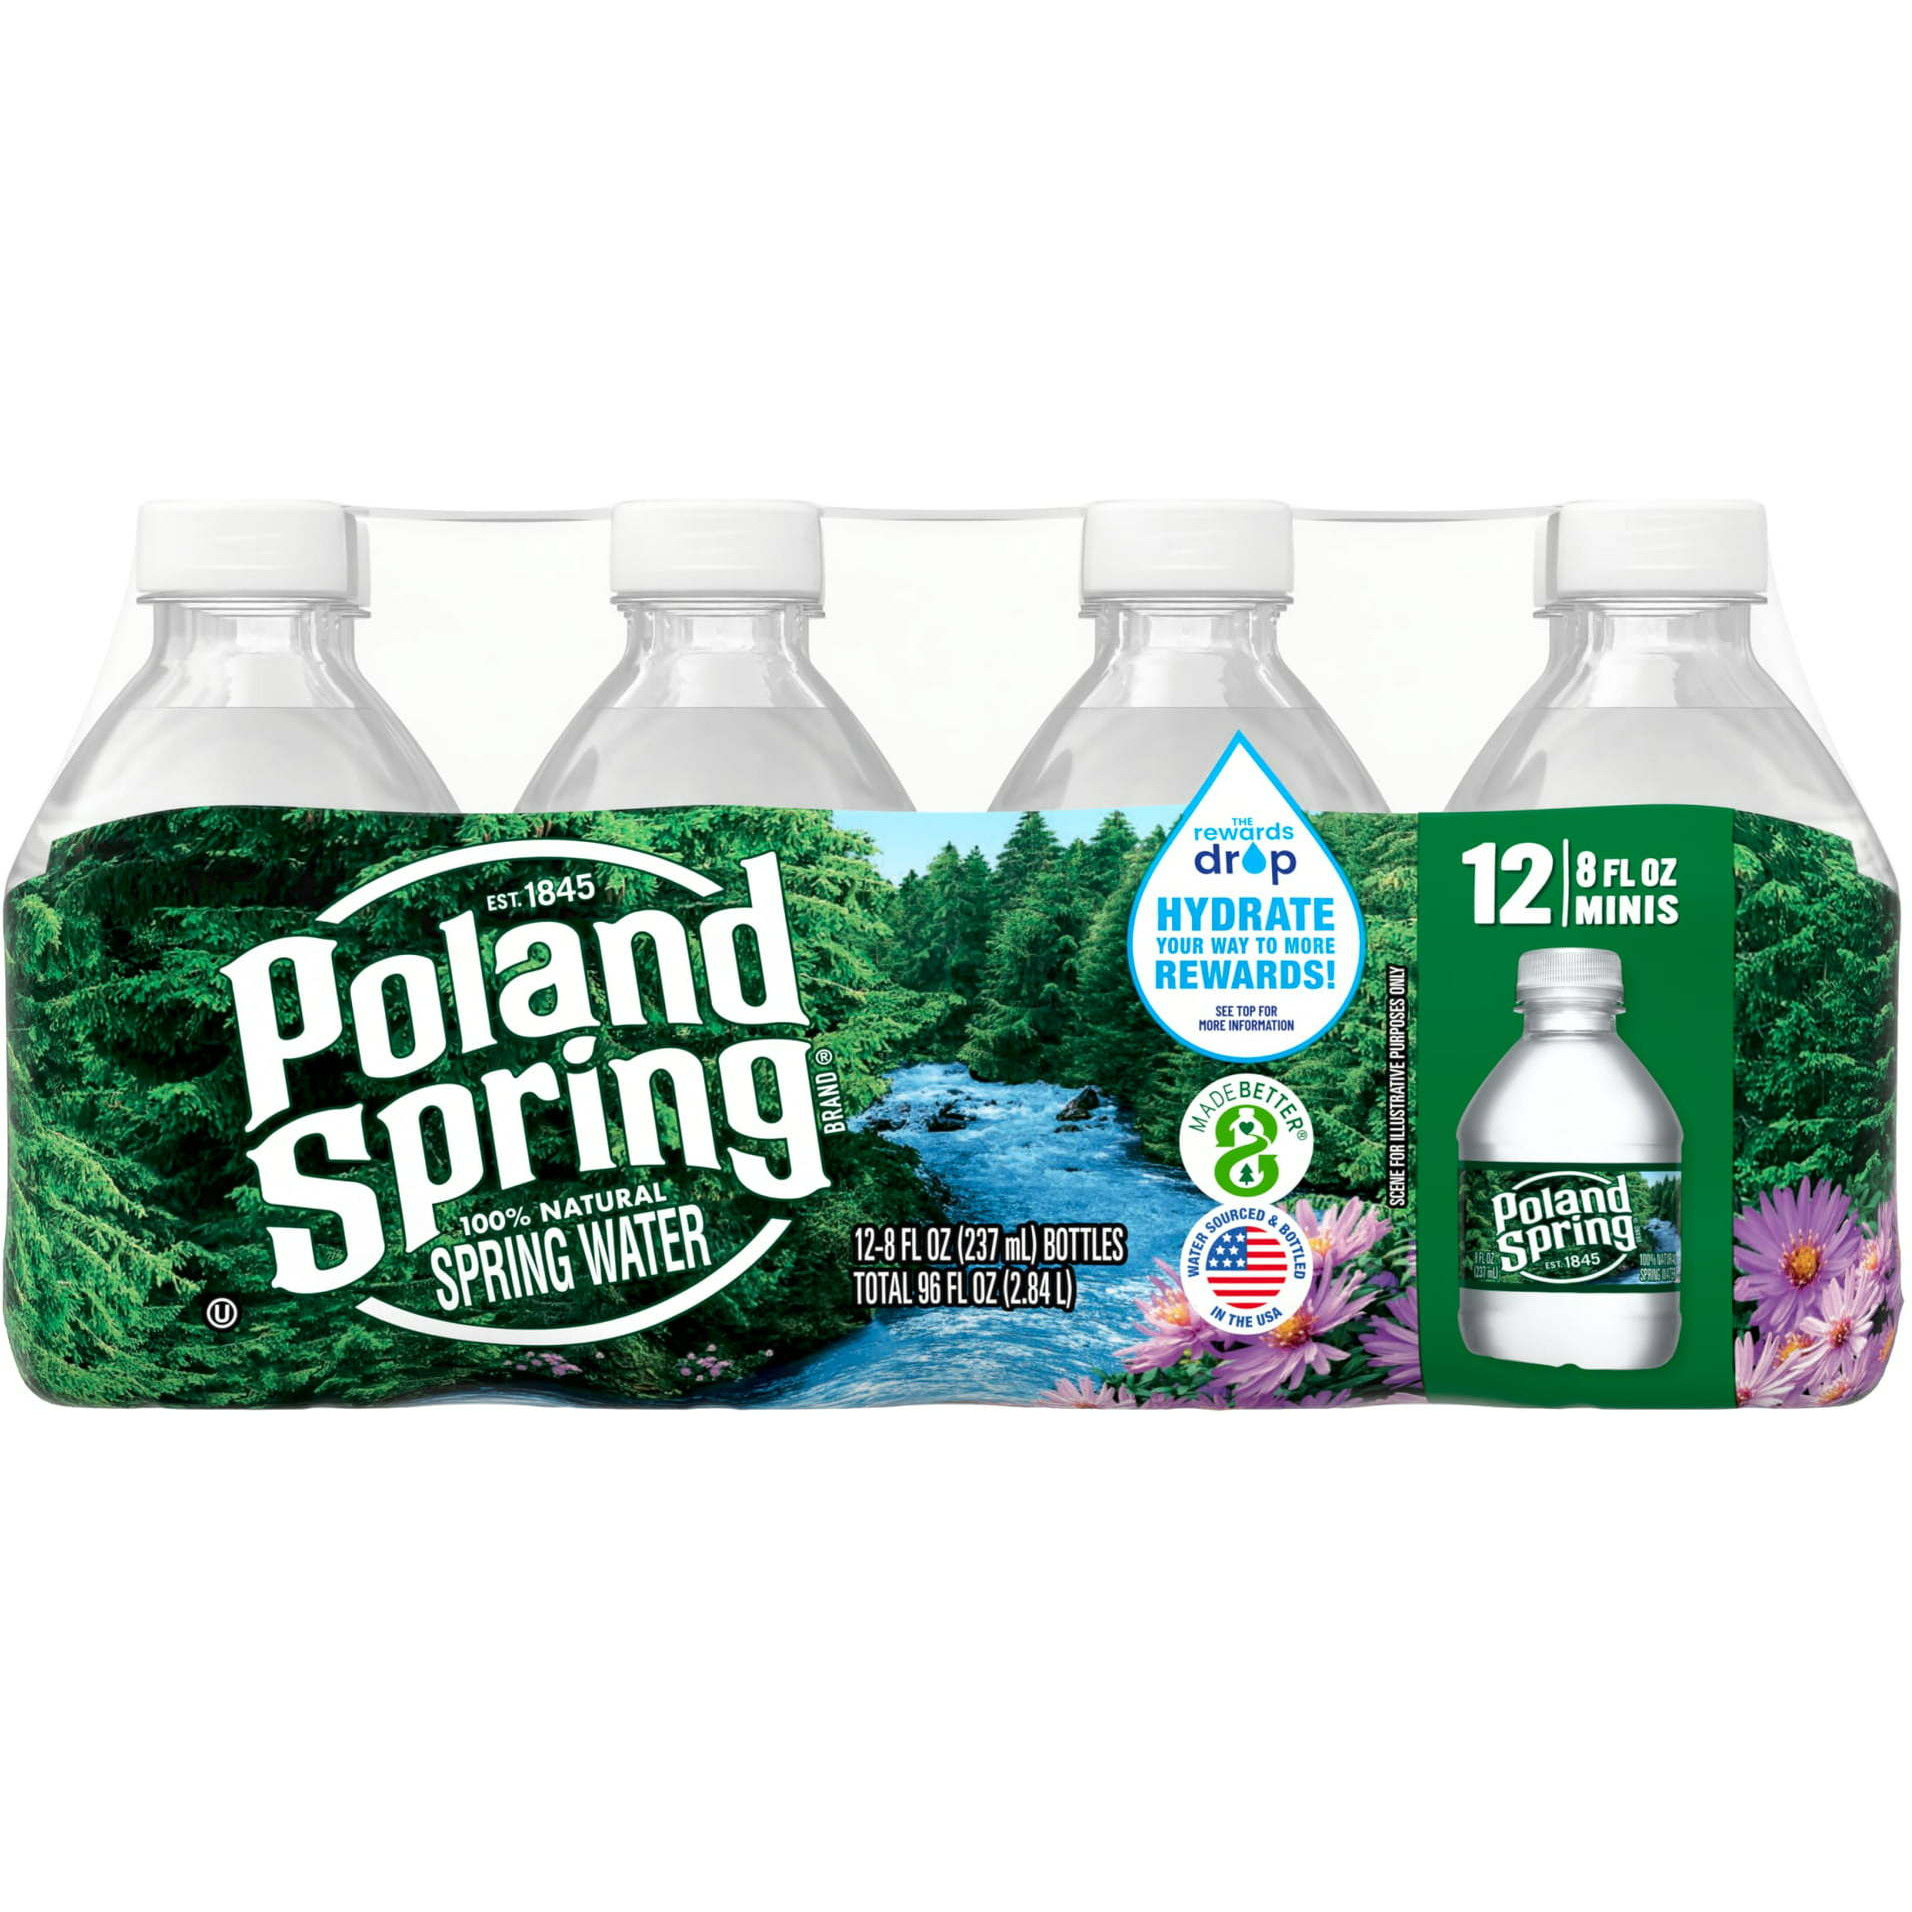 Case of 4 - Poland Spring Natural Water 12 Pack - 8 Oz